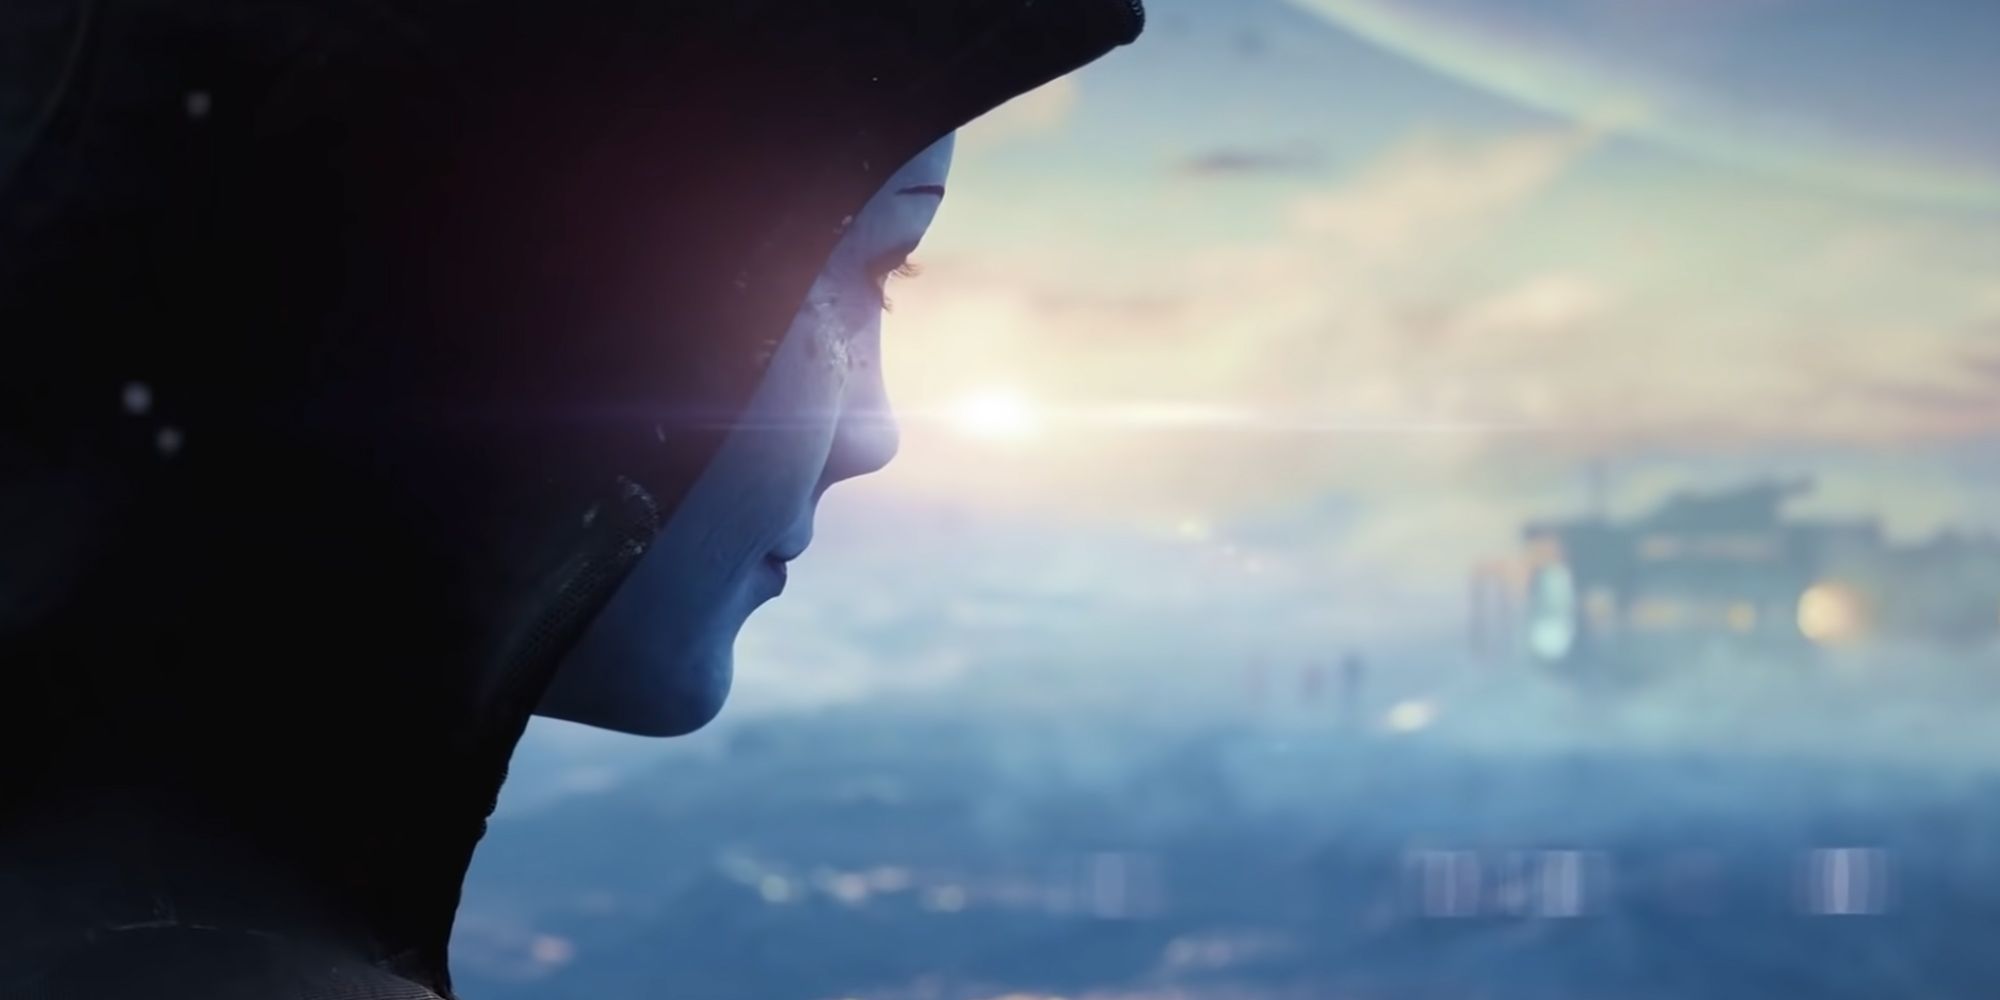 Liara looking out over a snowy landscape in Mass Effect trailer